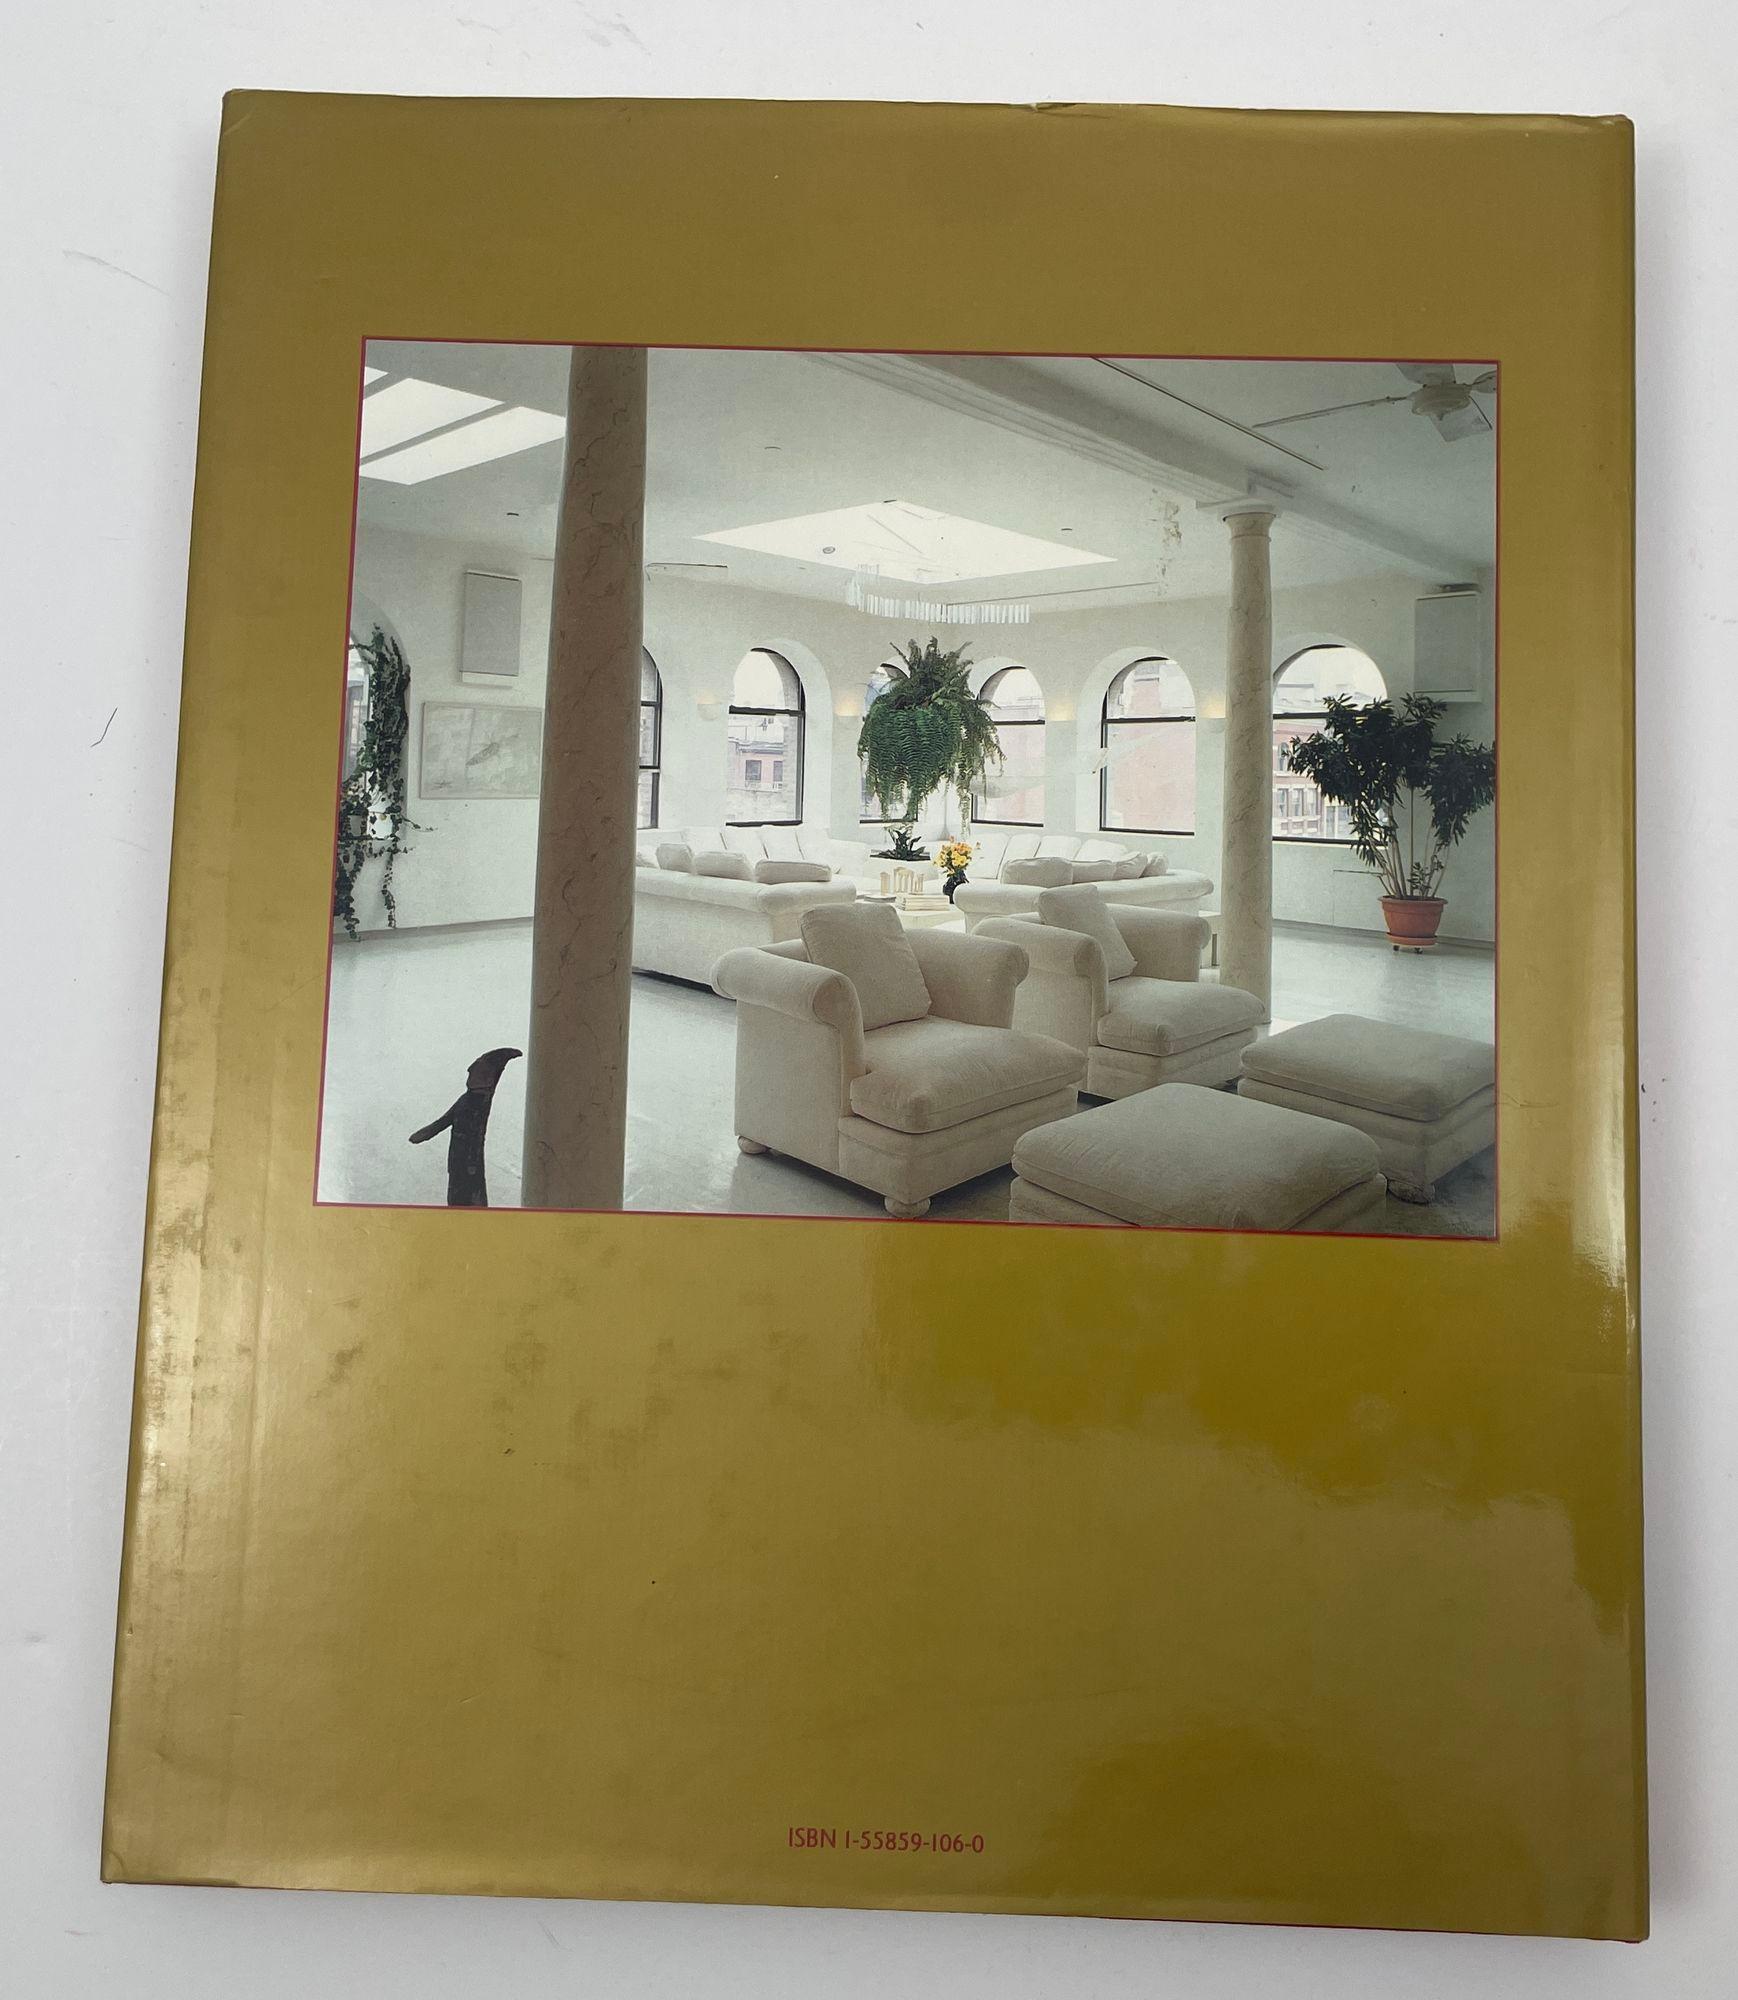 American New York Apartments: Private Views Hardcover Book by Charles Davey